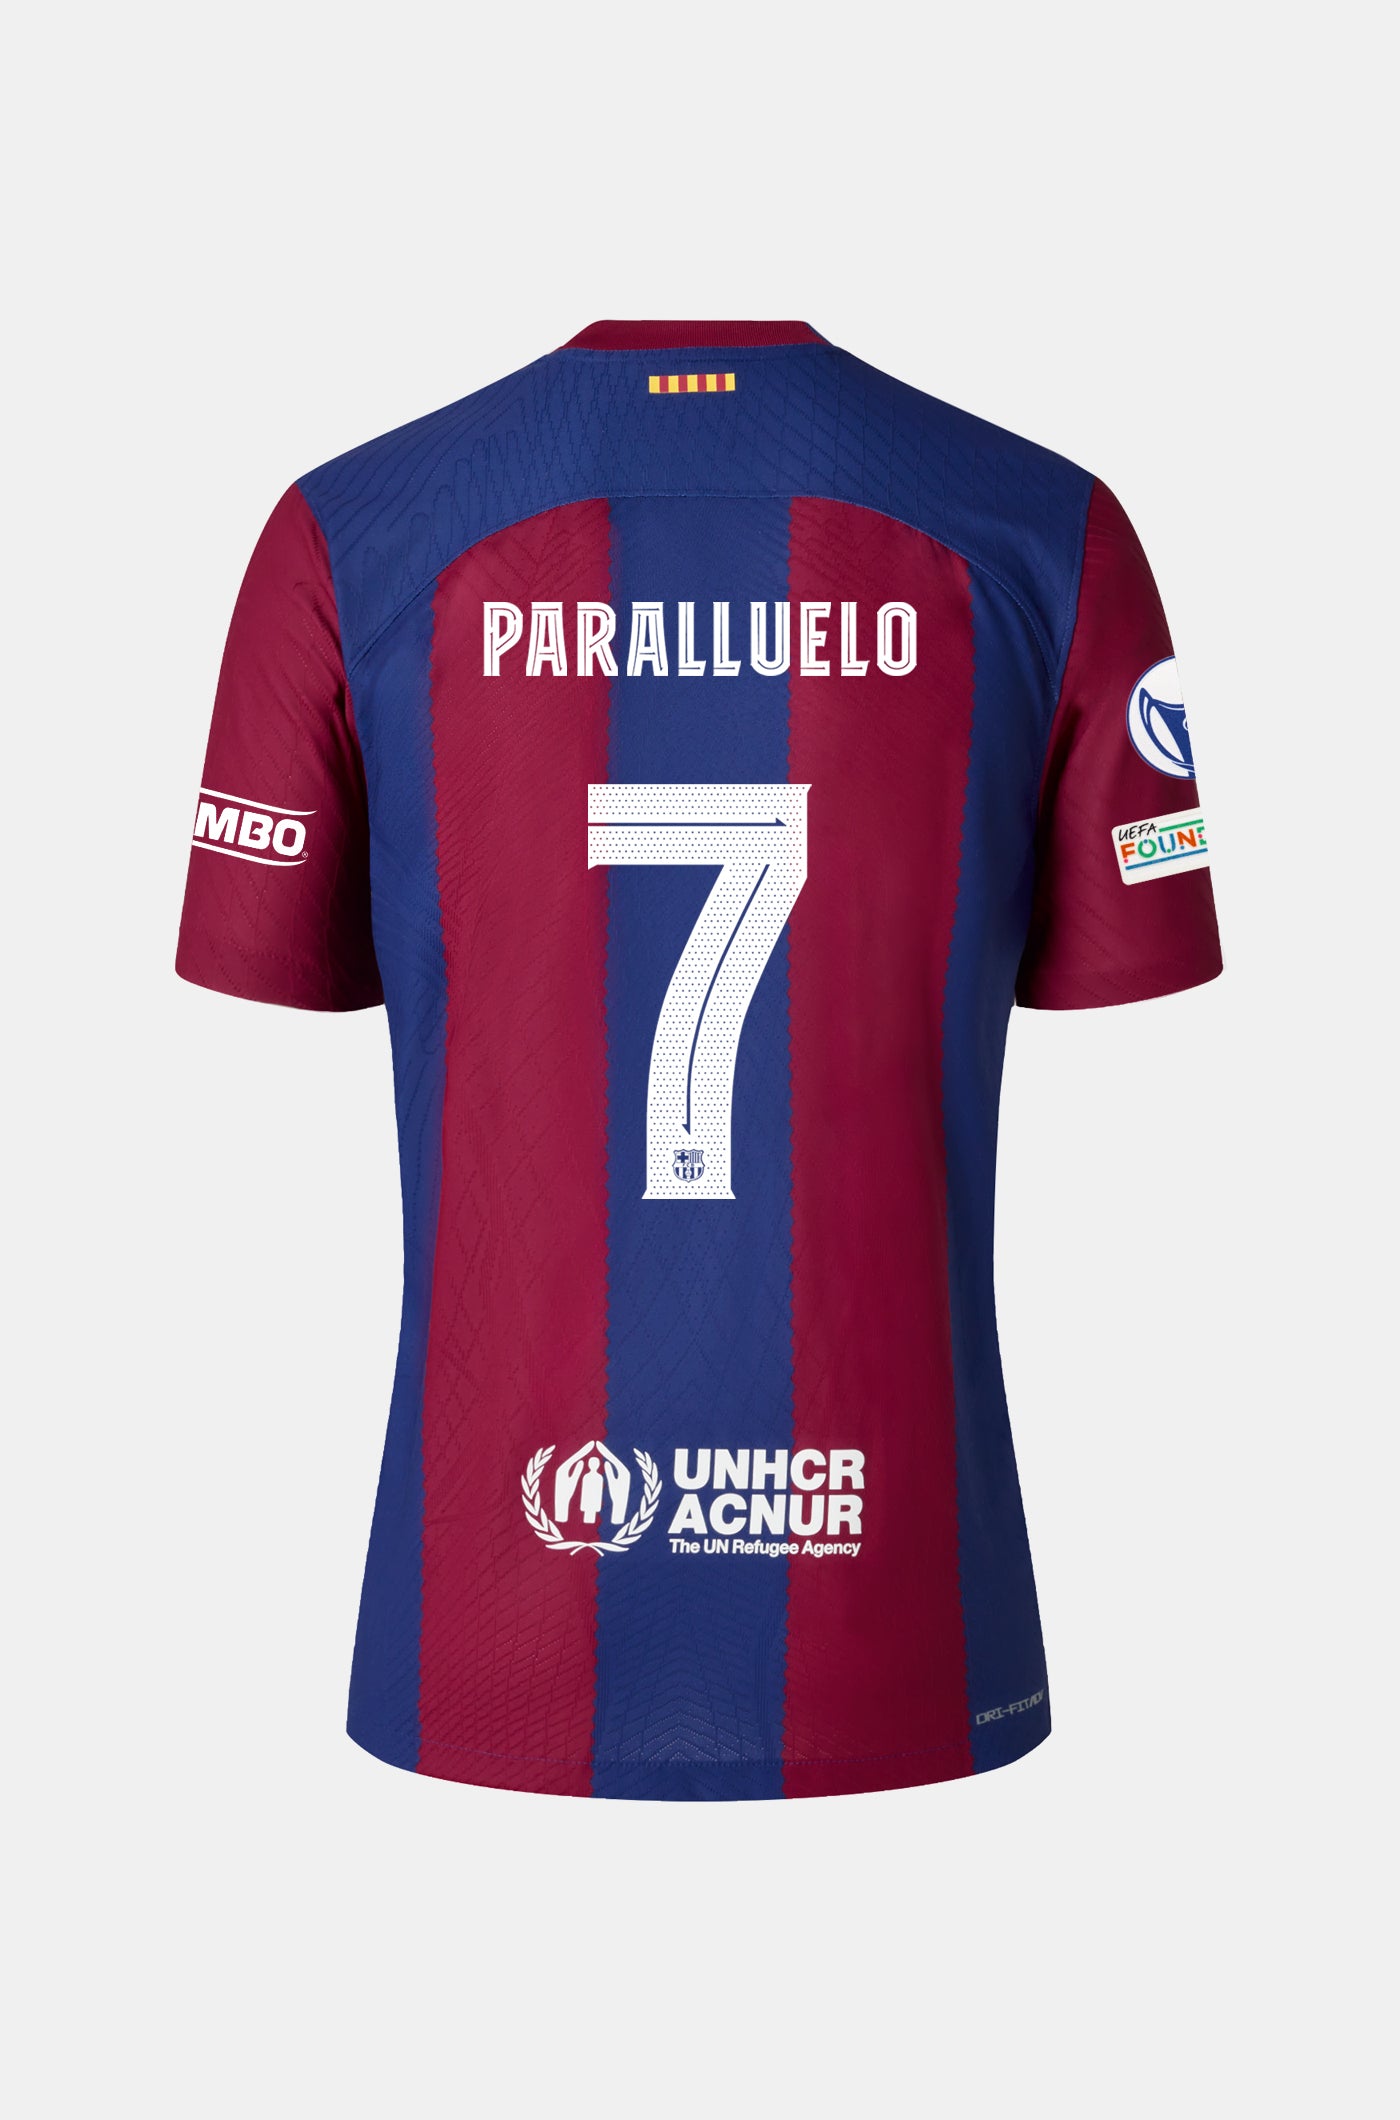 UWCL FC Barcelona home shirt 23/24 Player's Edition  - PARALLUELO